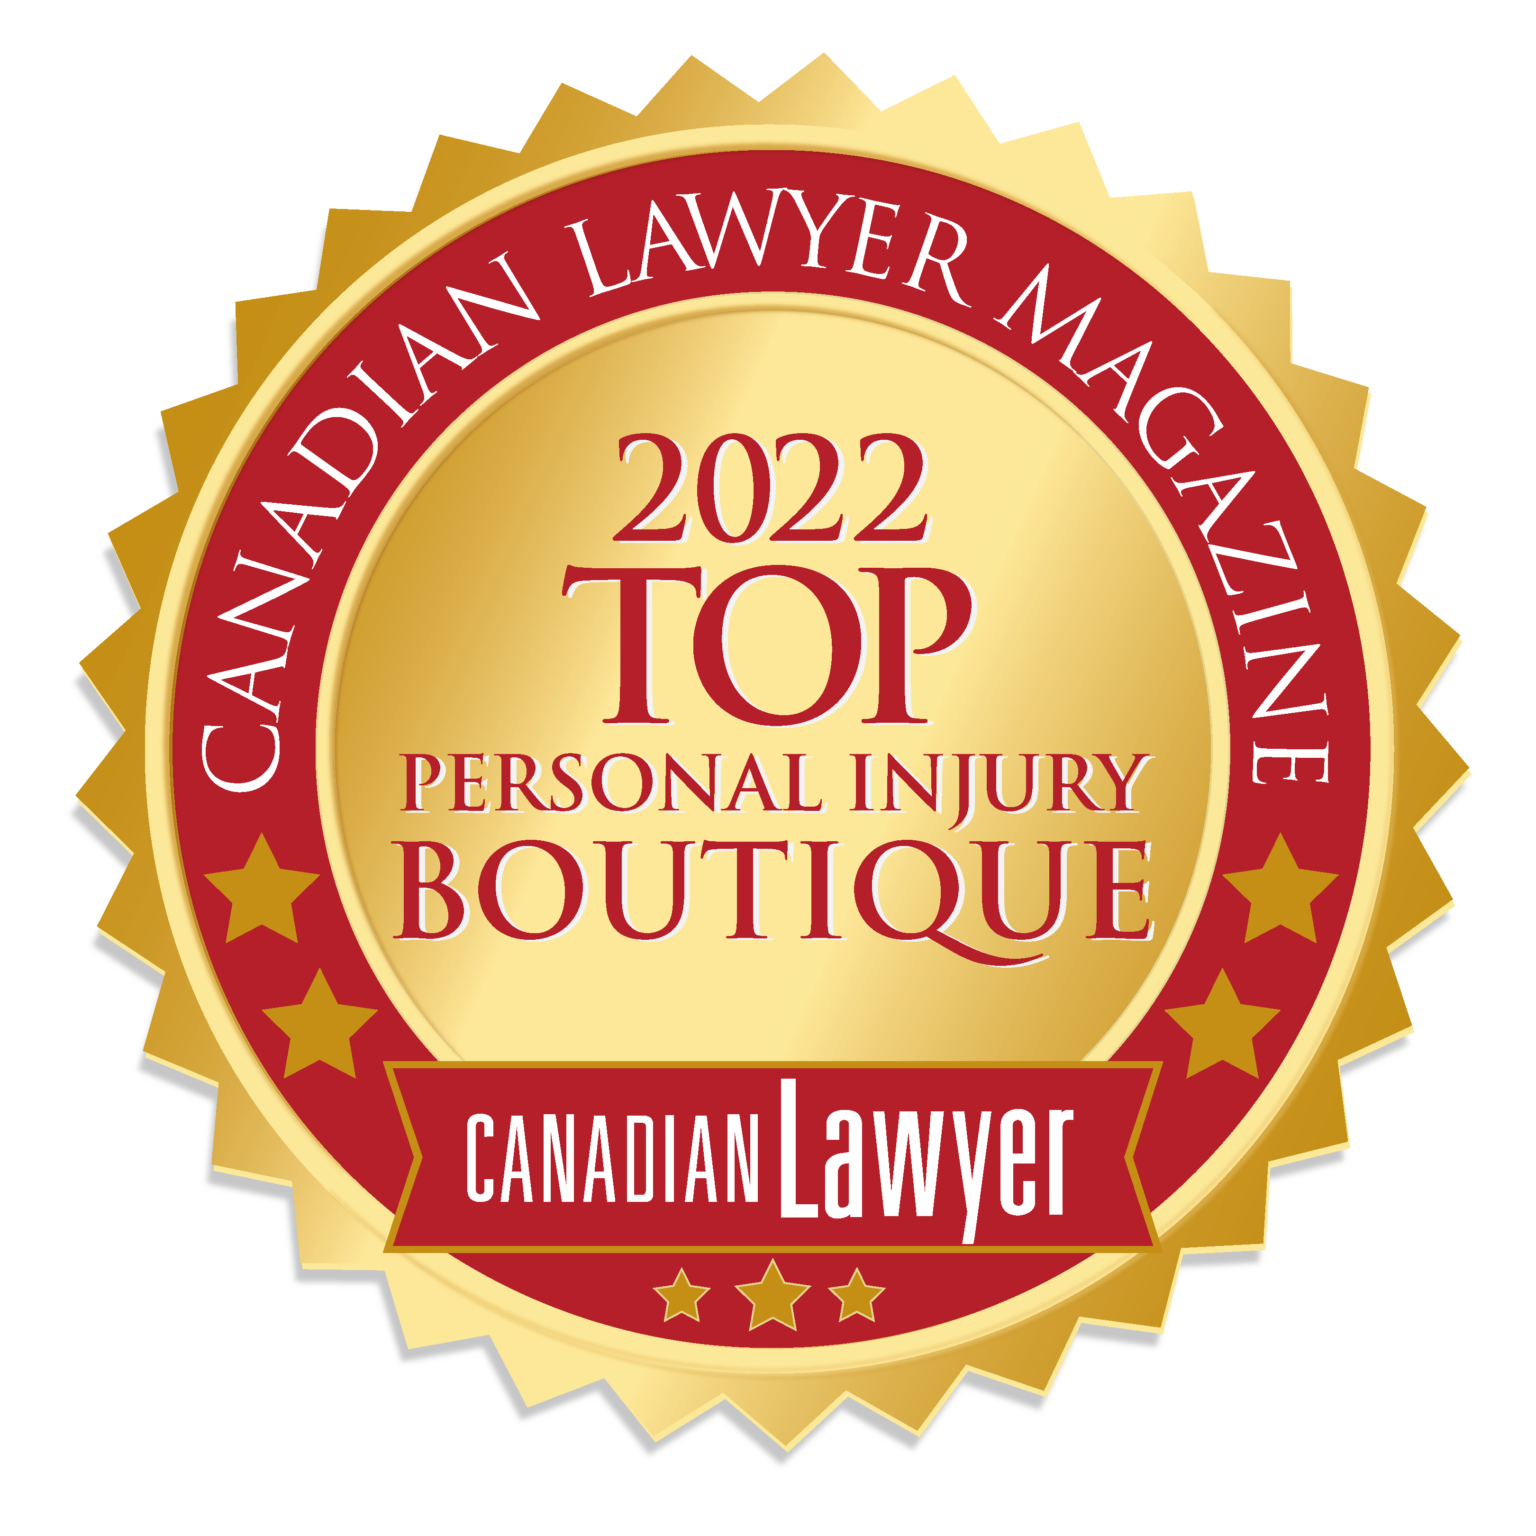 2022 Top Personal Injury Boutique